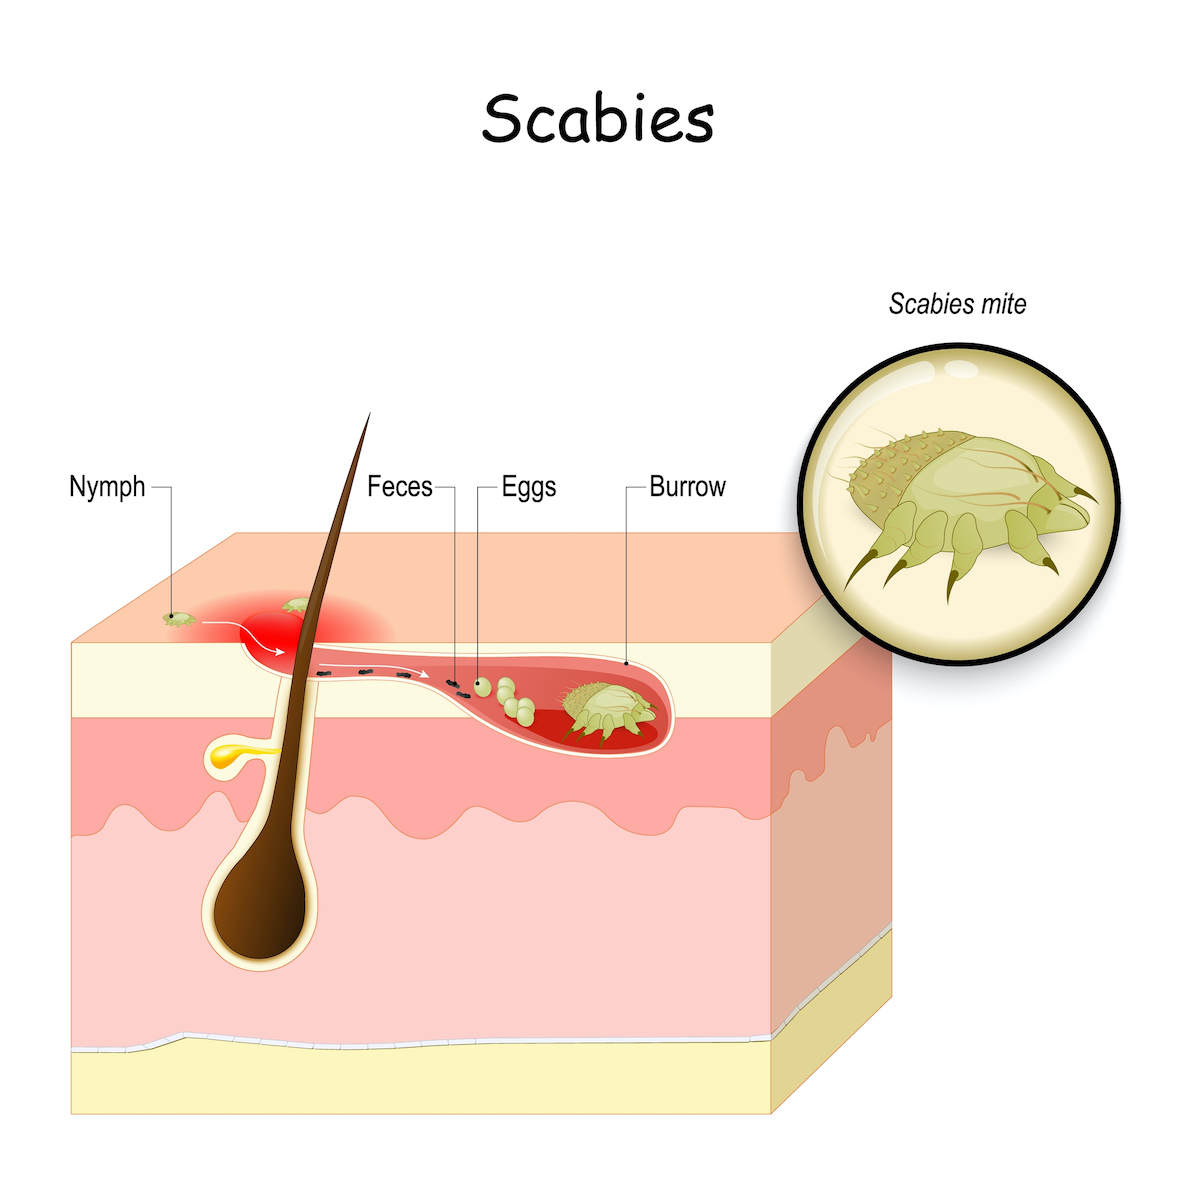 Scabies. seven-year itch is a contagious skin infestation by the mite Sarcoptes scabiei. Skin with eggs and mite in a burrow. Close-up of Scabies mite.